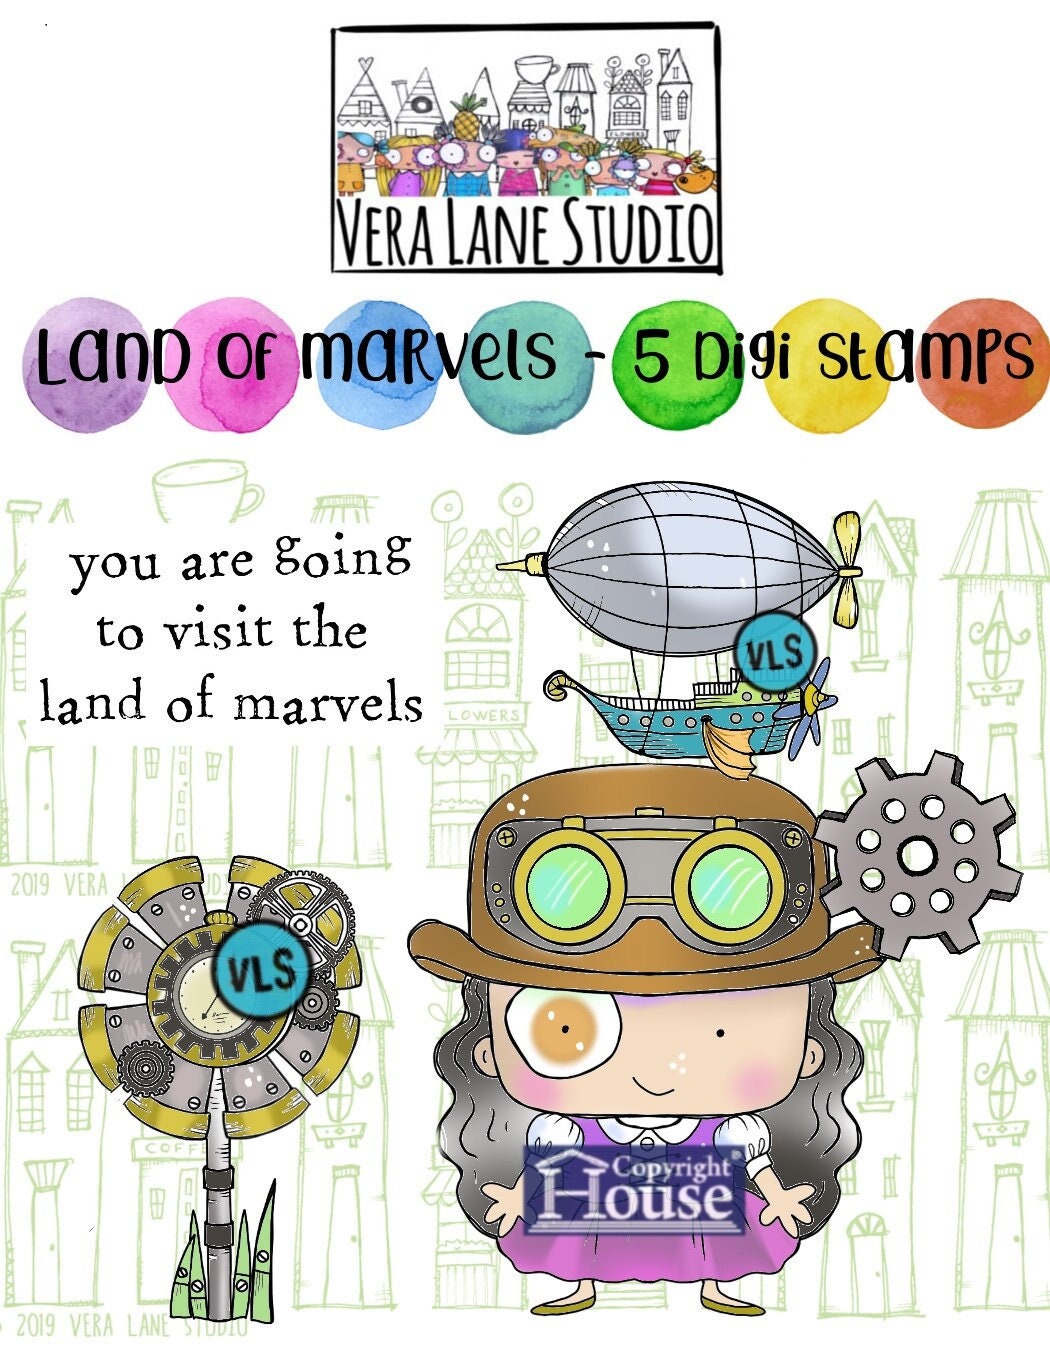 Land of Marvels - 5 digi stamps in jpg and png files